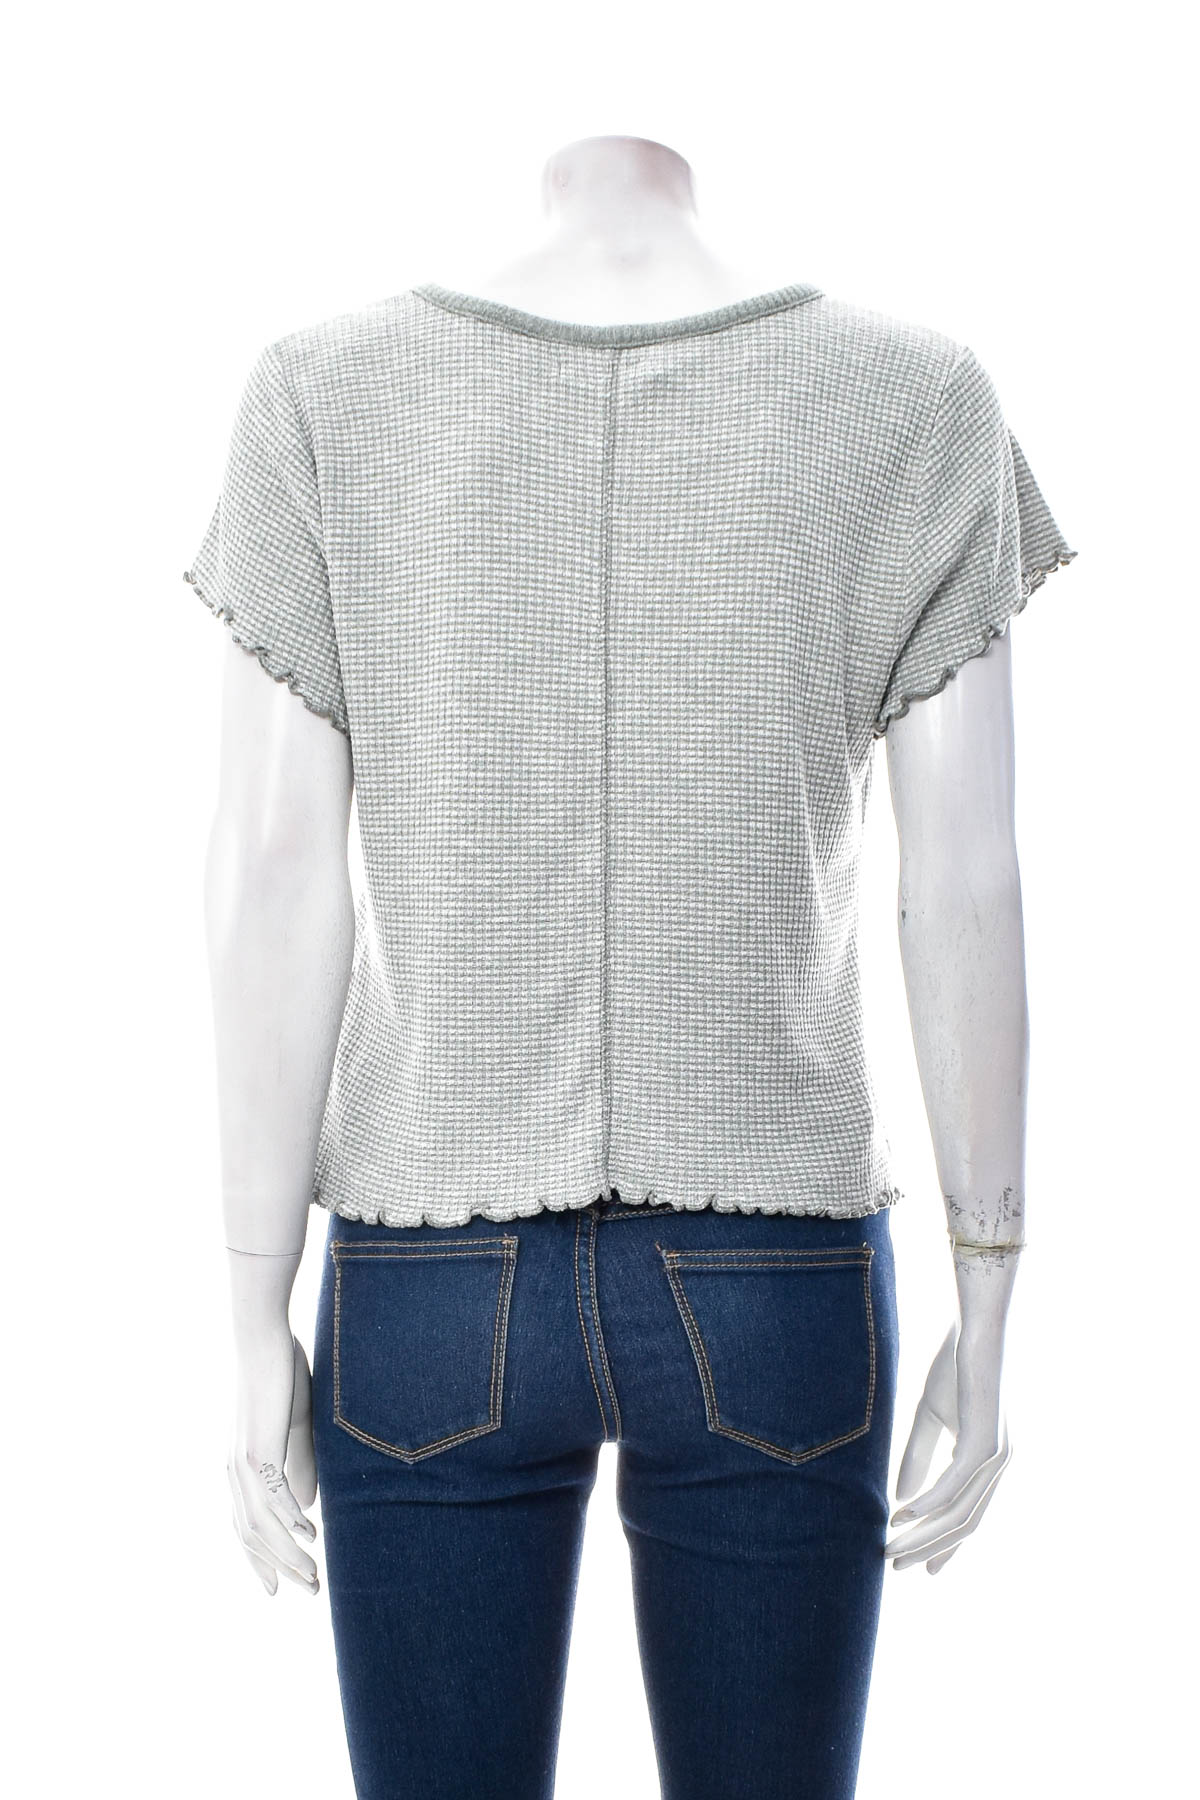 Women's sweater - Abercrombie & Fitch - 1